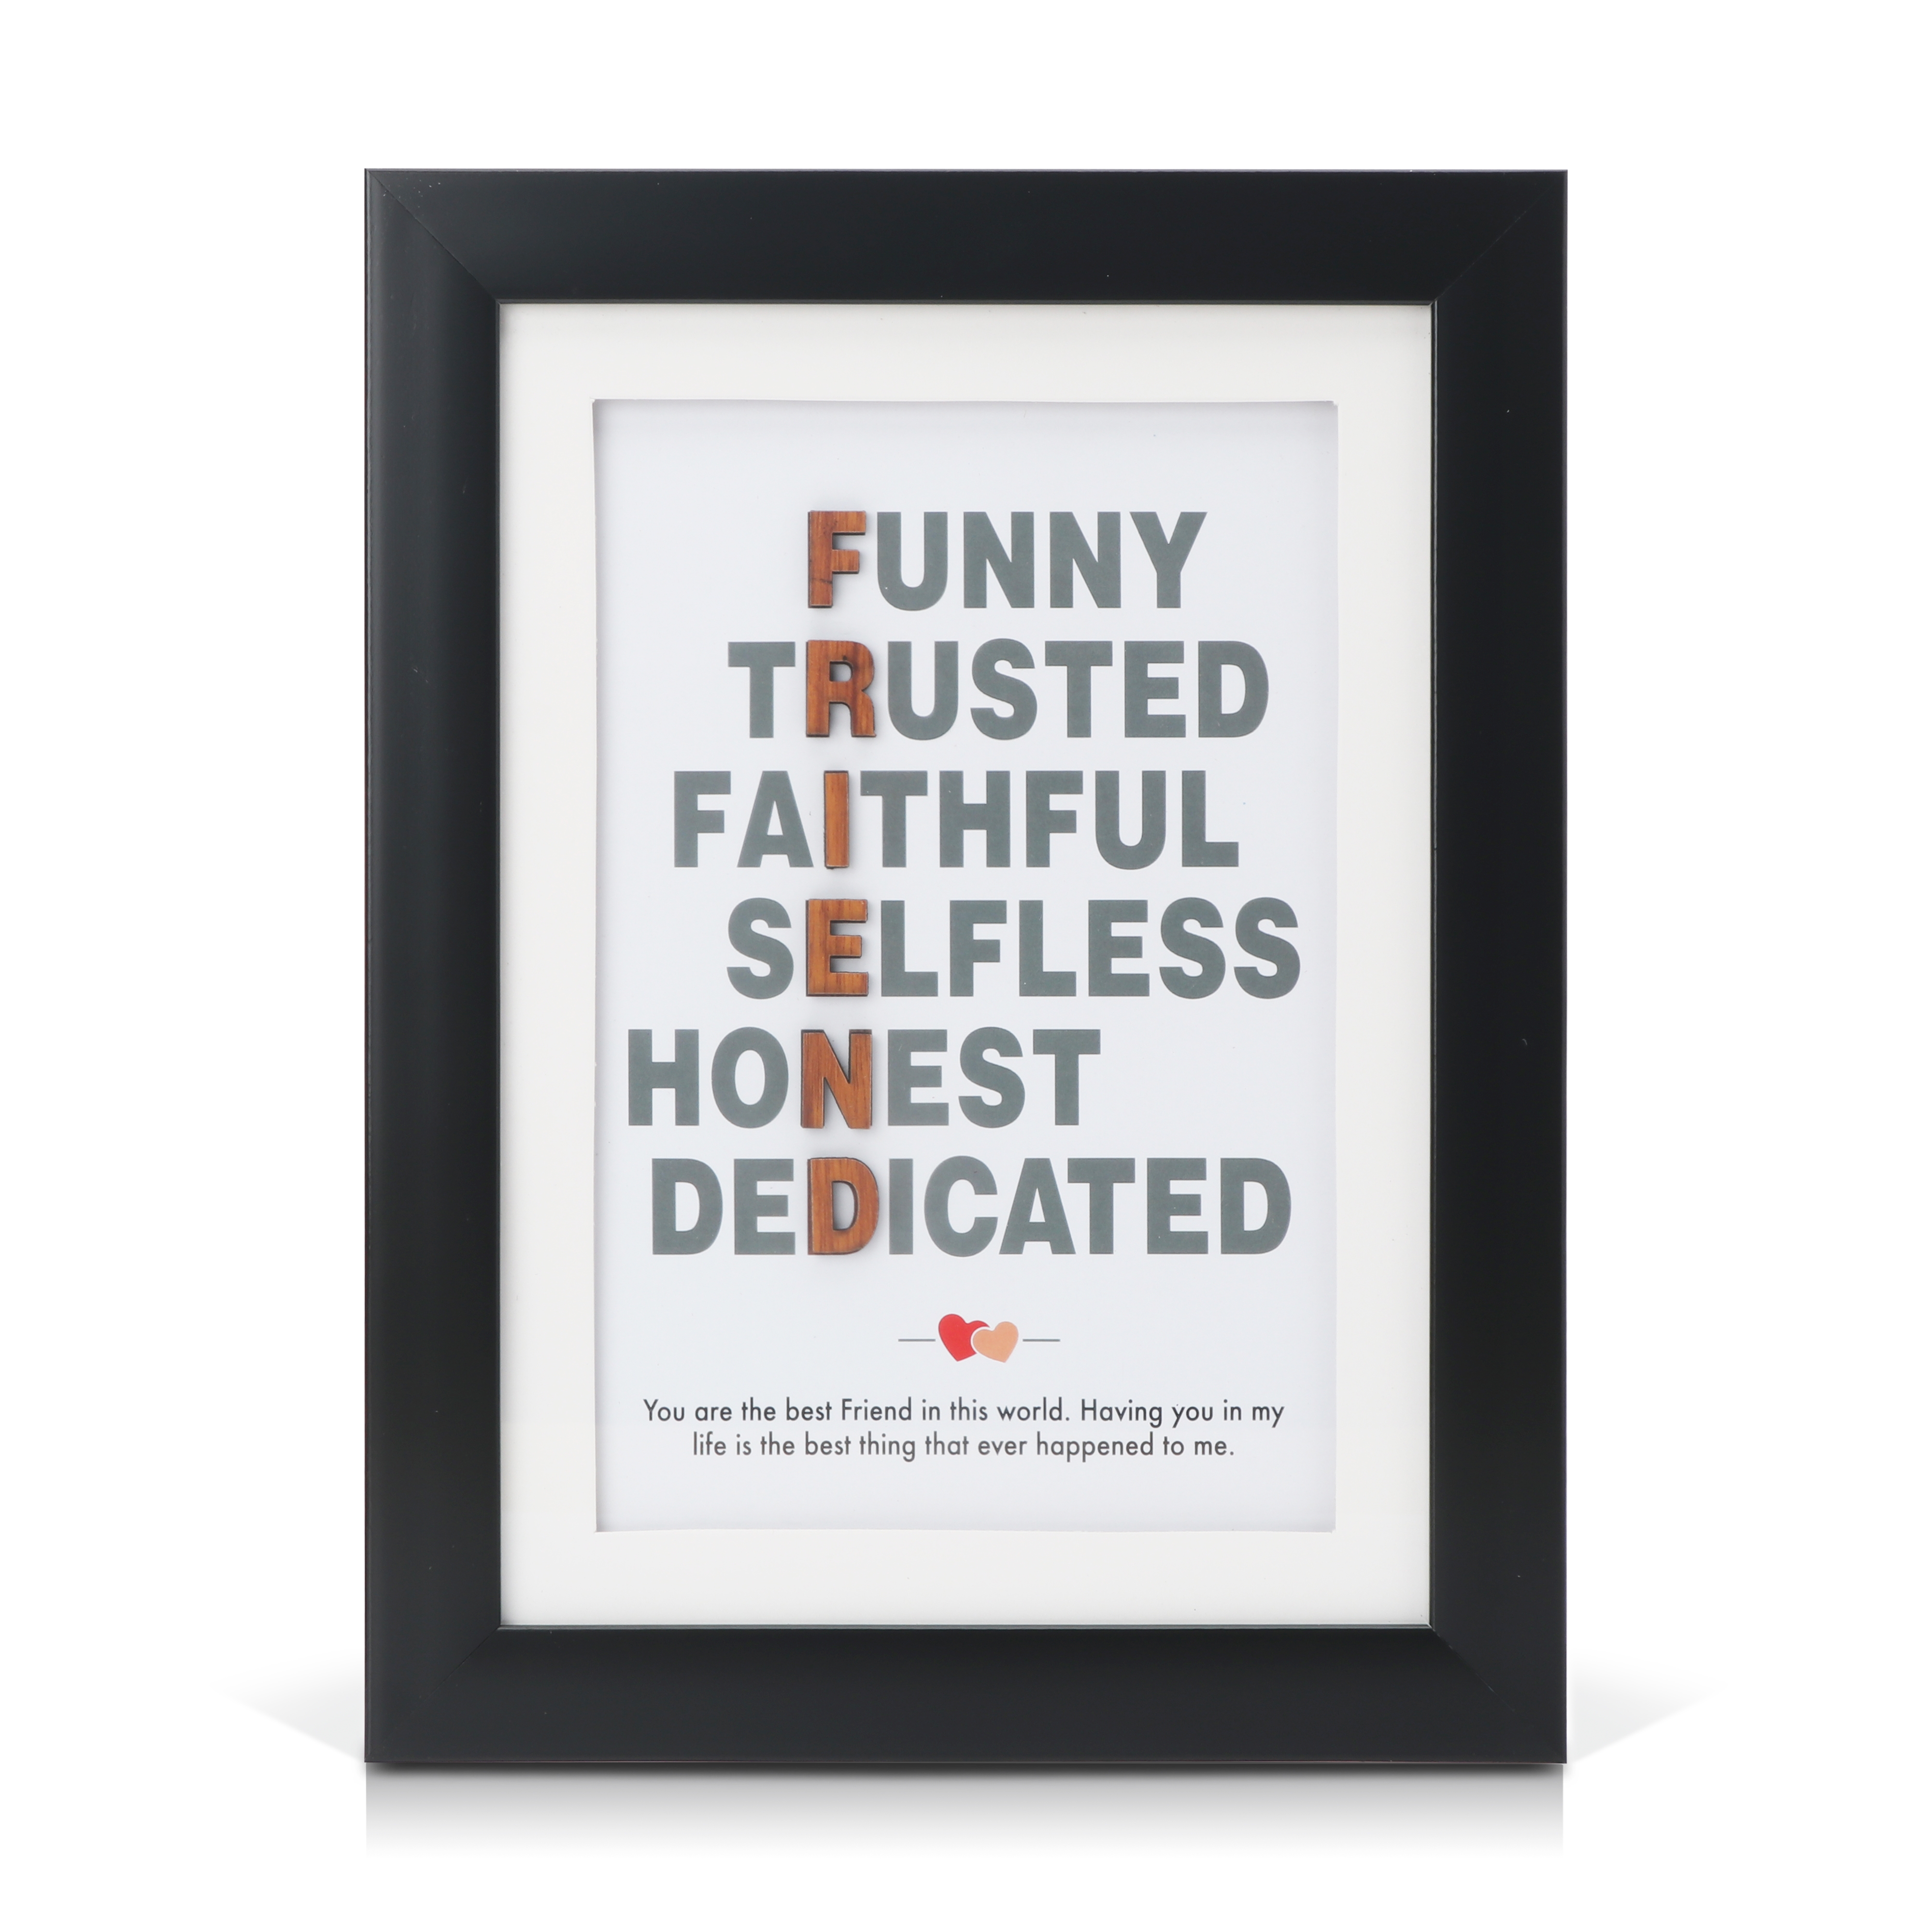 Archies | Archies Quotation Photo Frame with Greeting Card for Friend 0